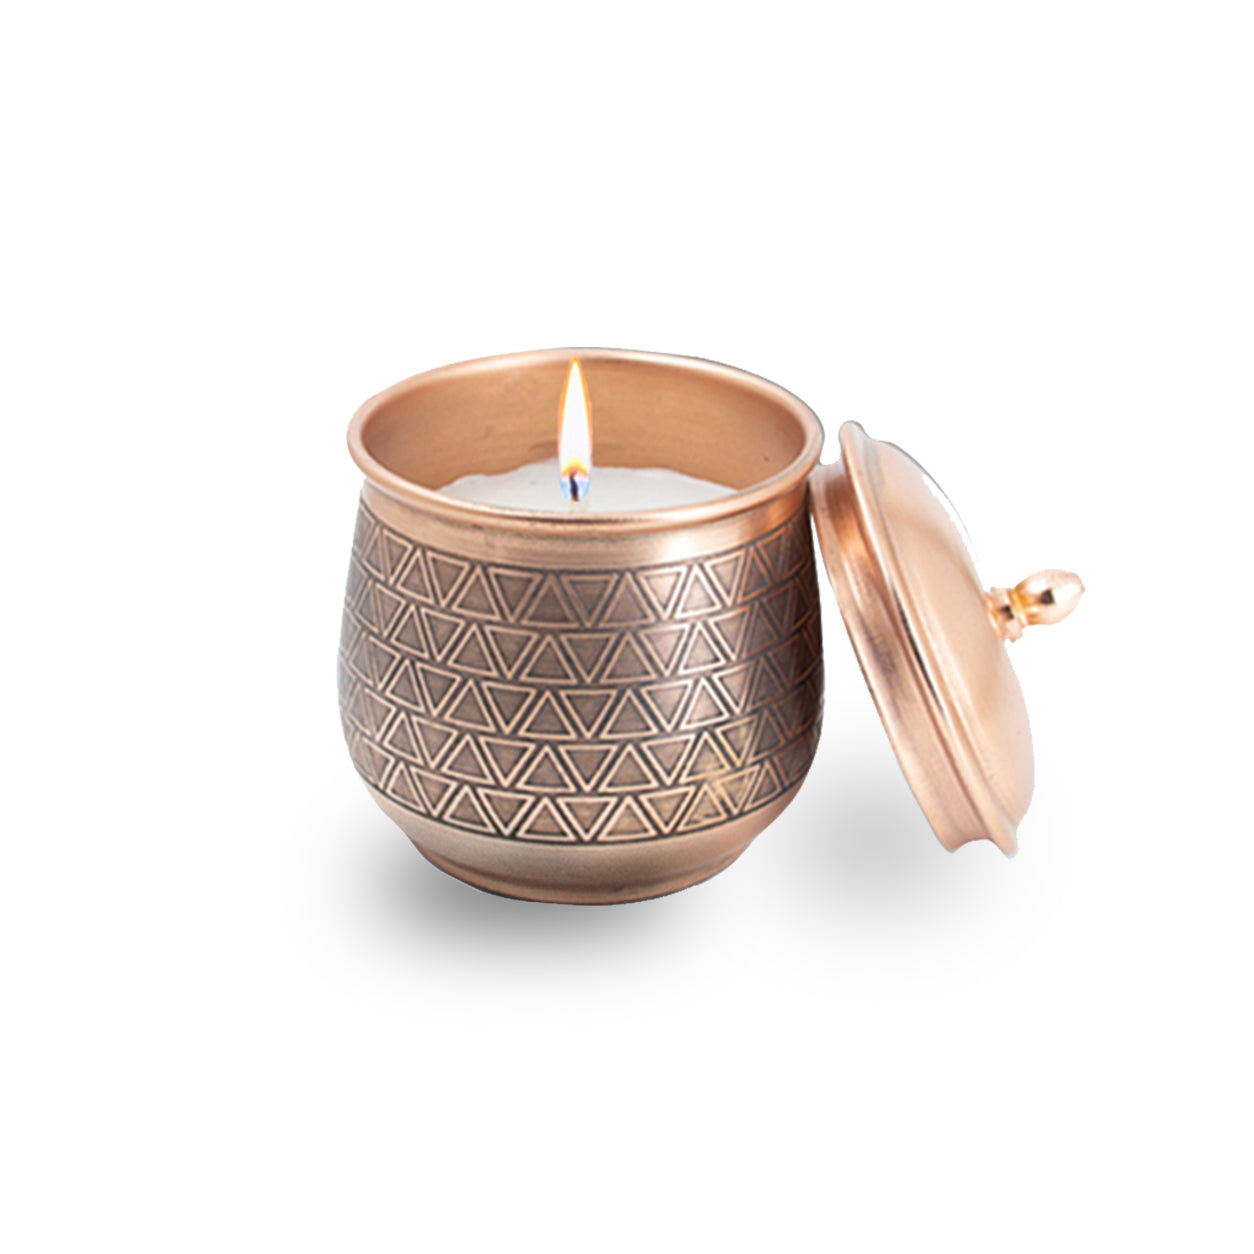 Natural Organic Aroma Soy Wax Scented Candles | Intensely fragranced Candles | Scented Aromatic Fragrance | Copper Finish Metal Jar (PACK OF 2)